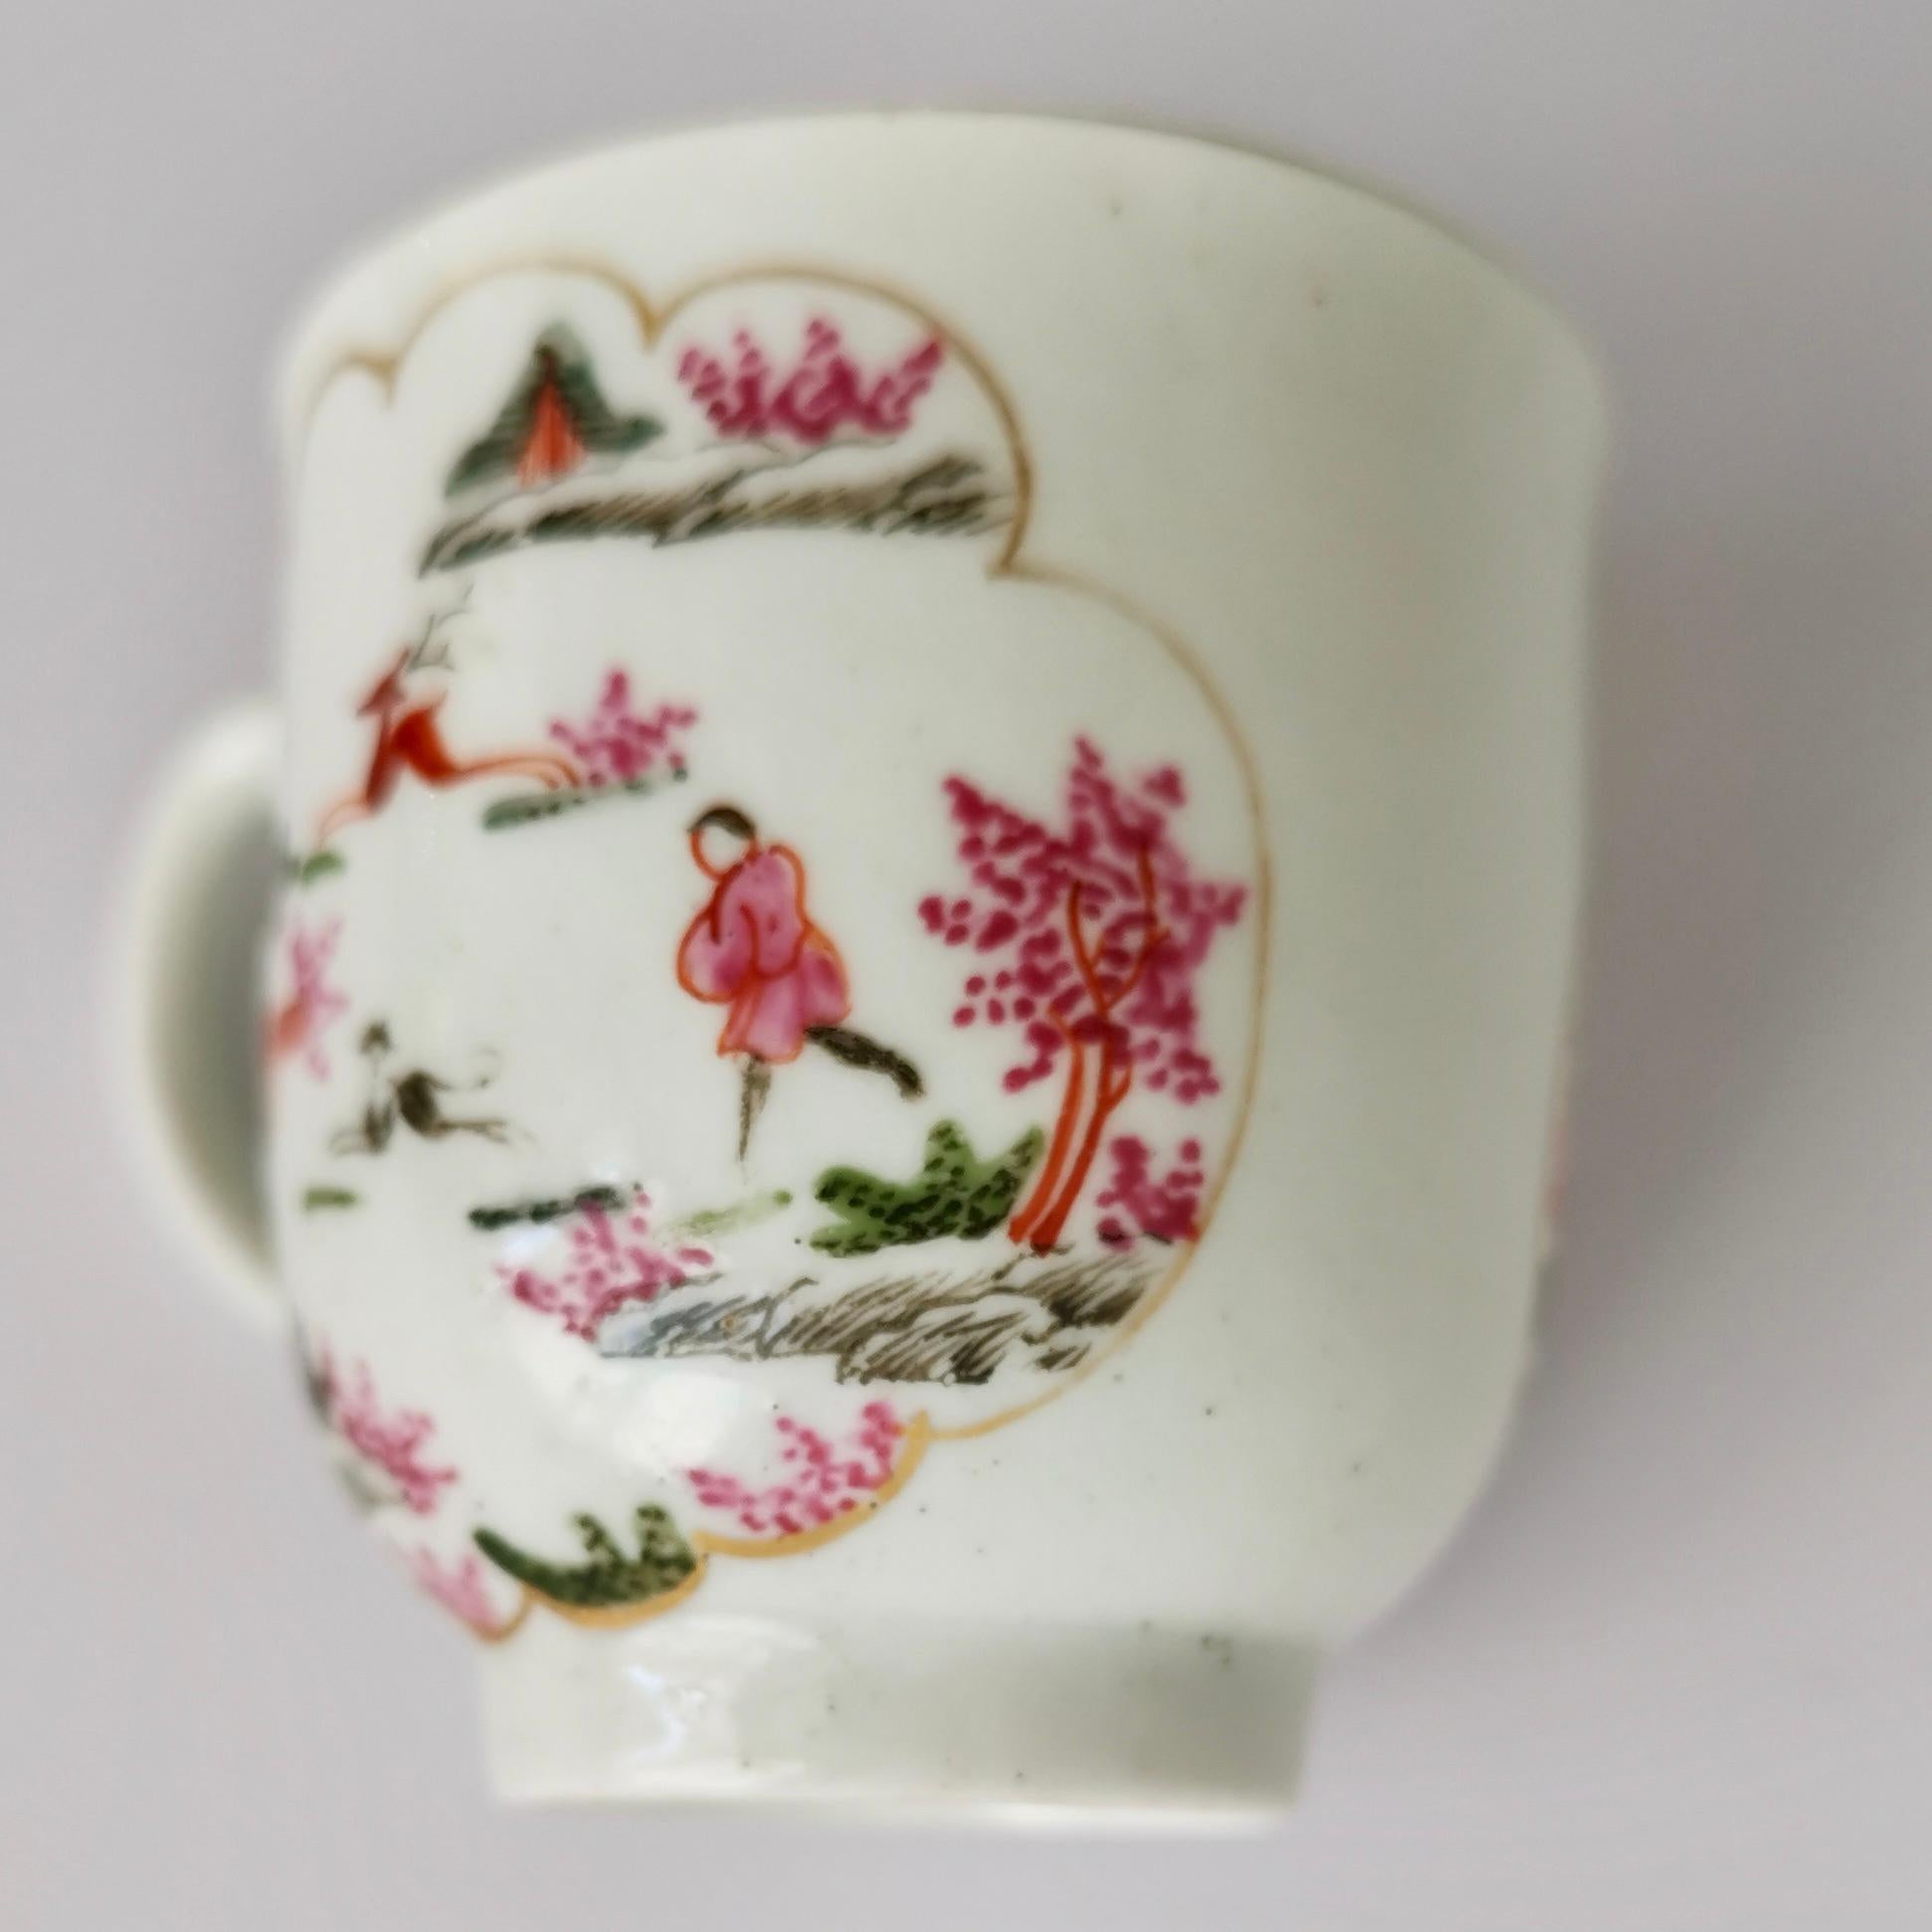 Porcelain Worcester Orphaned Coffee Cup, Stag Hunt Pattern, 1st Period, circa 1760